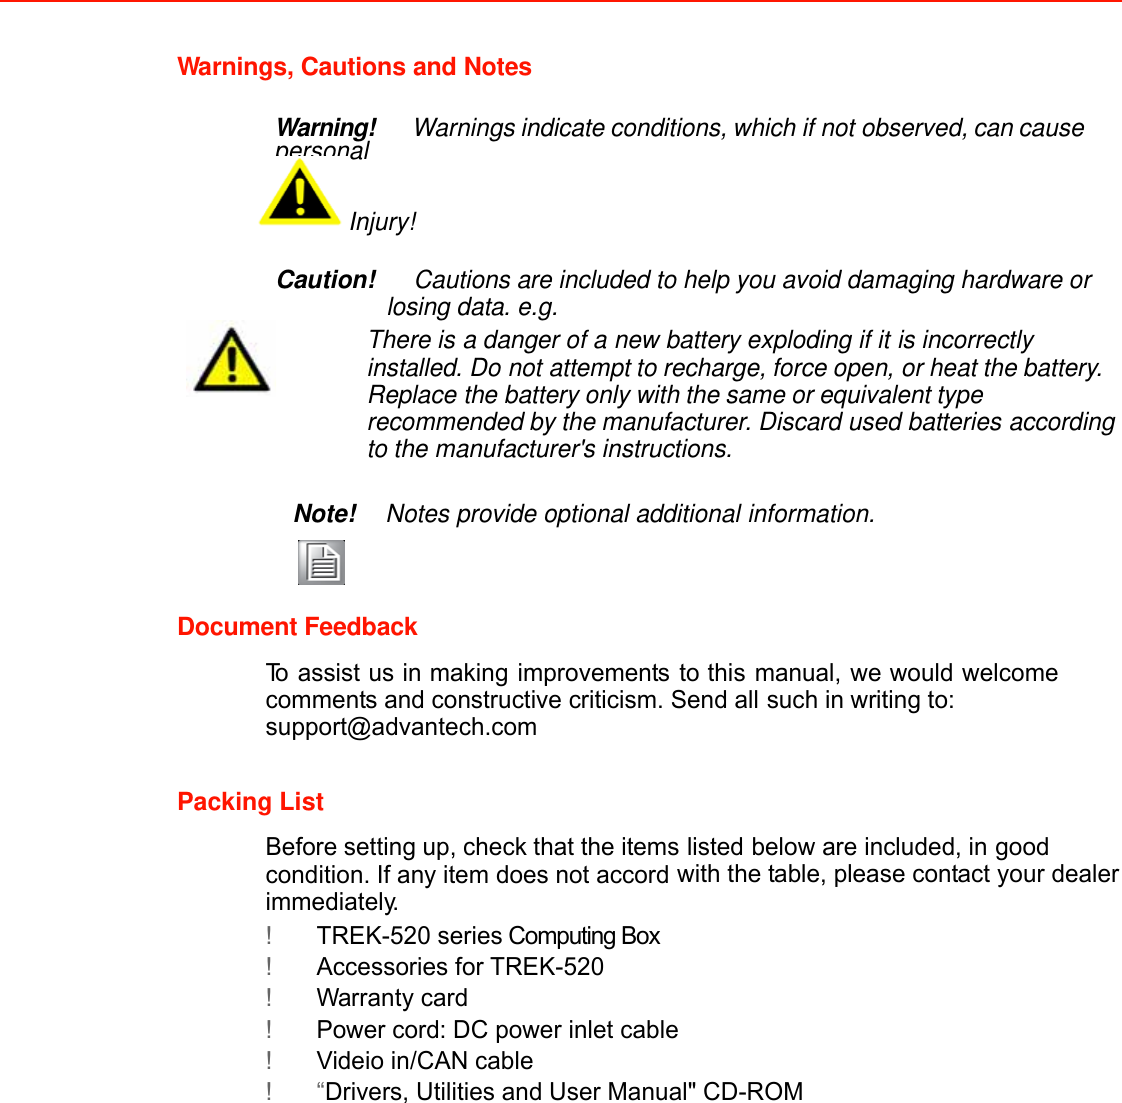 Warnings, Cautions and Notes   Warning!   Warnings indicate conditions, which if not observed, can cause personal Injury!   Caution!   Cautions are included to help you avoid damaging hardware or losing data. e.g. There is a danger of a new battery exploding if it is incorrectly installed. Do not attempt to recharge, force open, or heat the battery. Replace the battery only with the same or equivalent type recommended by the manufacturer. Discard used batteries according to the manufacturer&apos;s instructions.   Note! Notes provide optional additional information.    Document Feedback  To assist us in making improvements to this manual, we would welcome comments and constructive criticism. Send all such in writing to: support@advantech.com   Packing List  Before setting up, check that the items listed below are included, in good condition. If any item does not accord with the table, please contact your dealer immediately.  ! TREK-520 series Computing Box ! Accessories for TREK-520 ! Warranty card ! Power cord: DC power inlet cable  ! Videio in/CAN cable ! “Drivers, Utilities and User Manual&quot; CD-ROM               